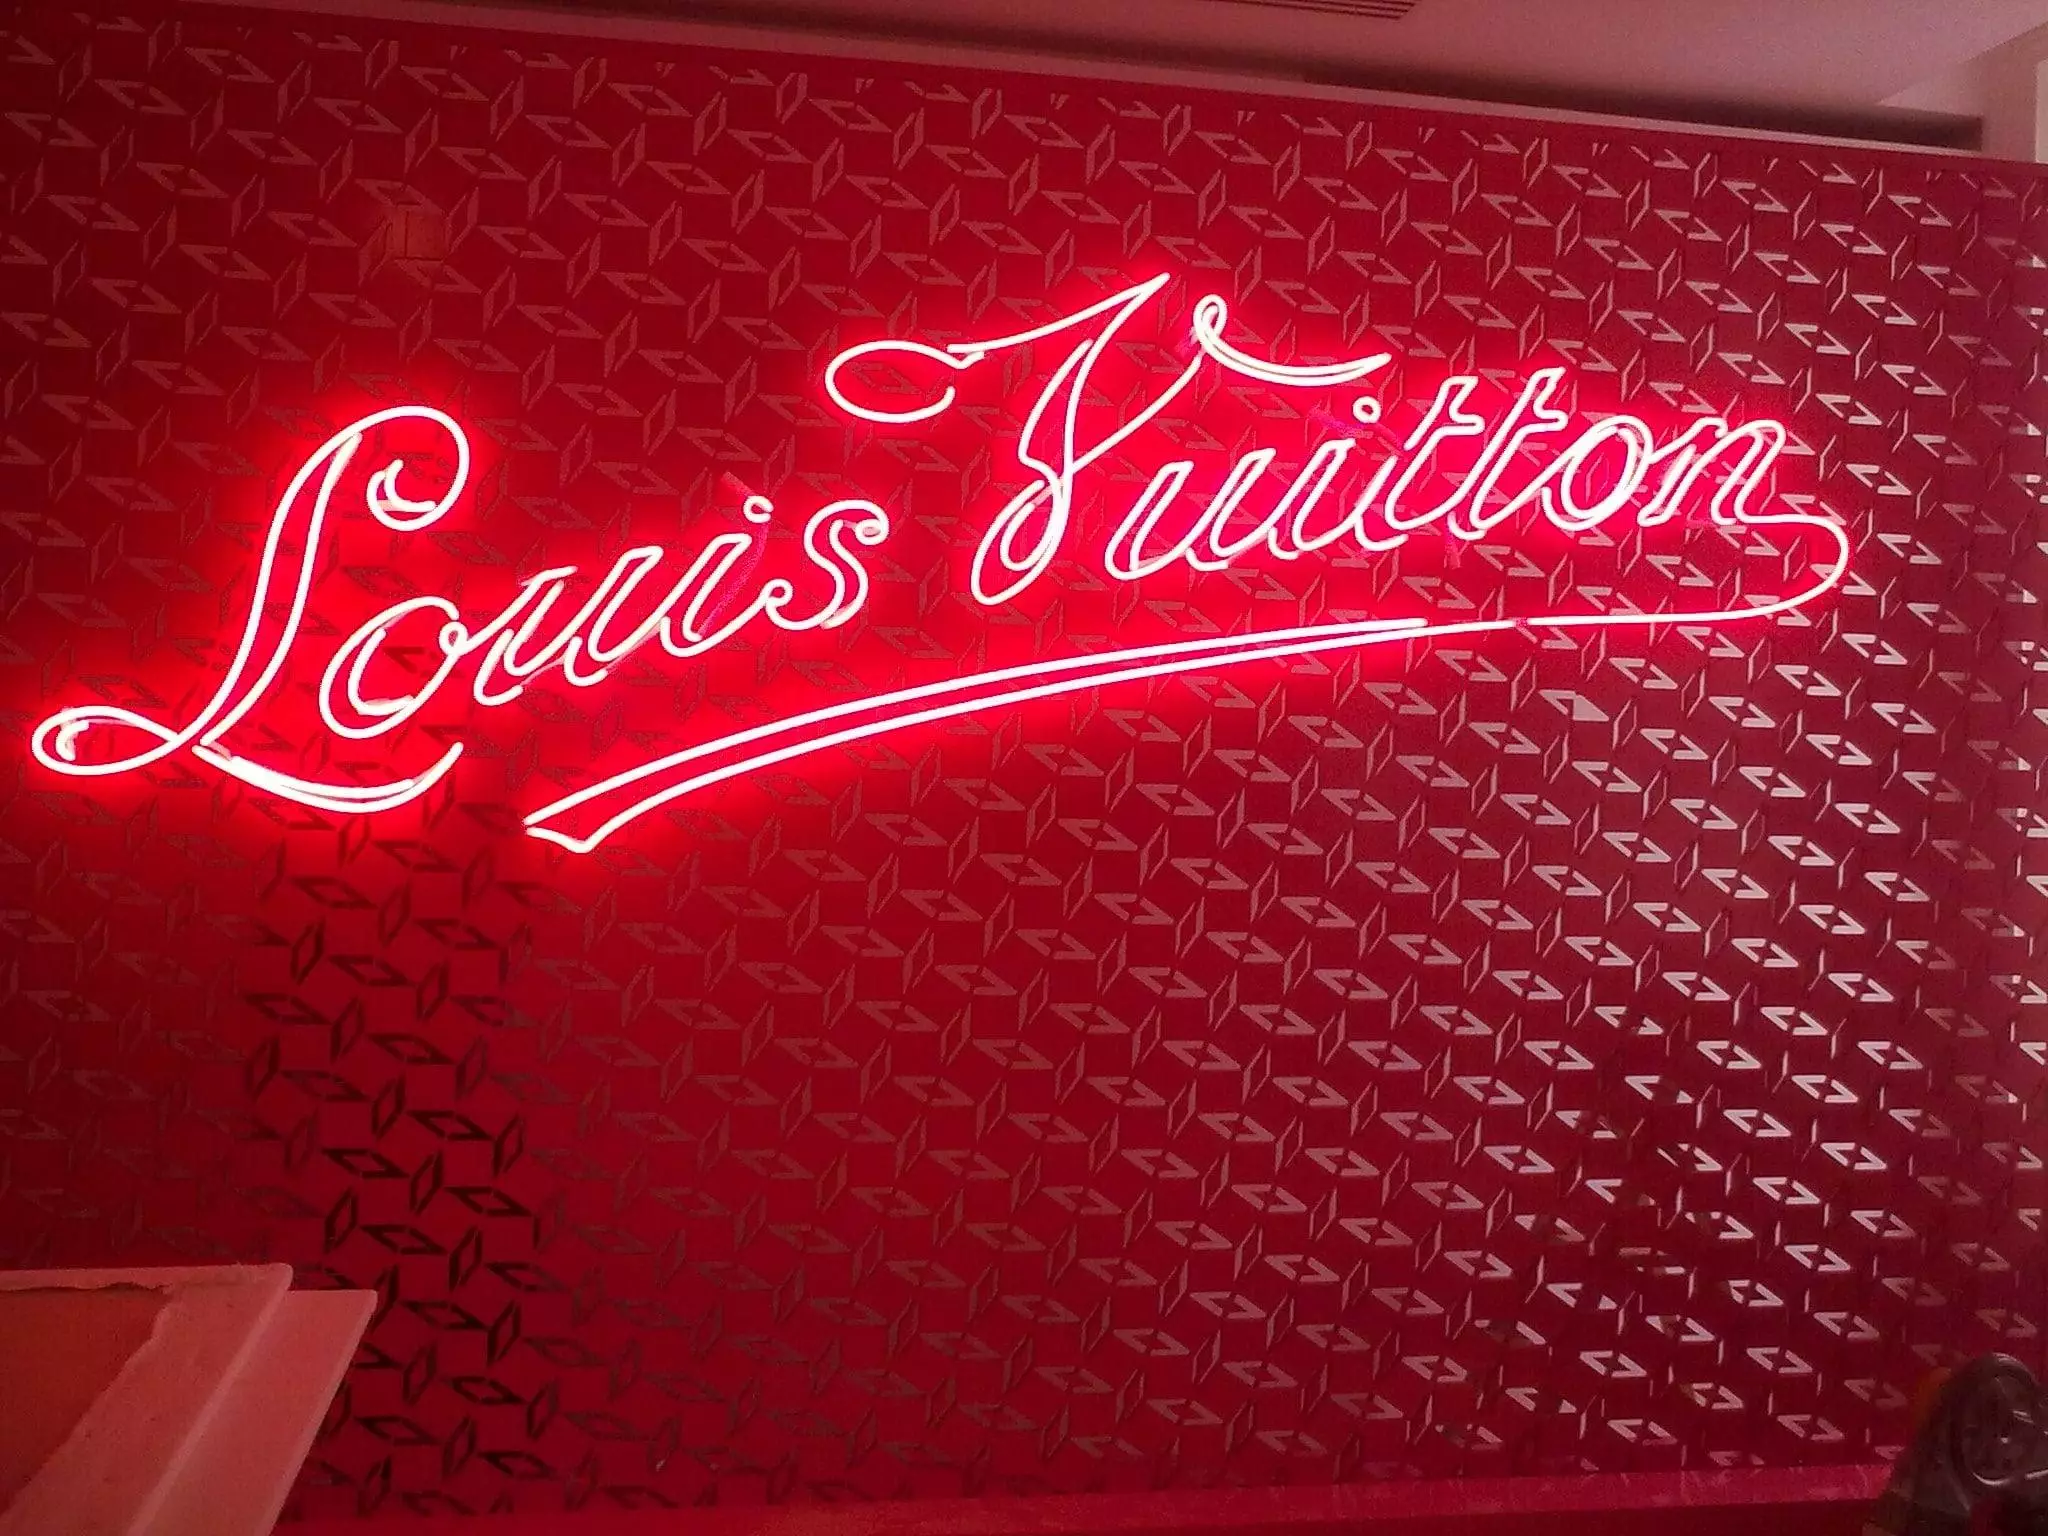 Louis Vuitton red logo, , red neon lights, creative, red abstract background,  HD wallpaper